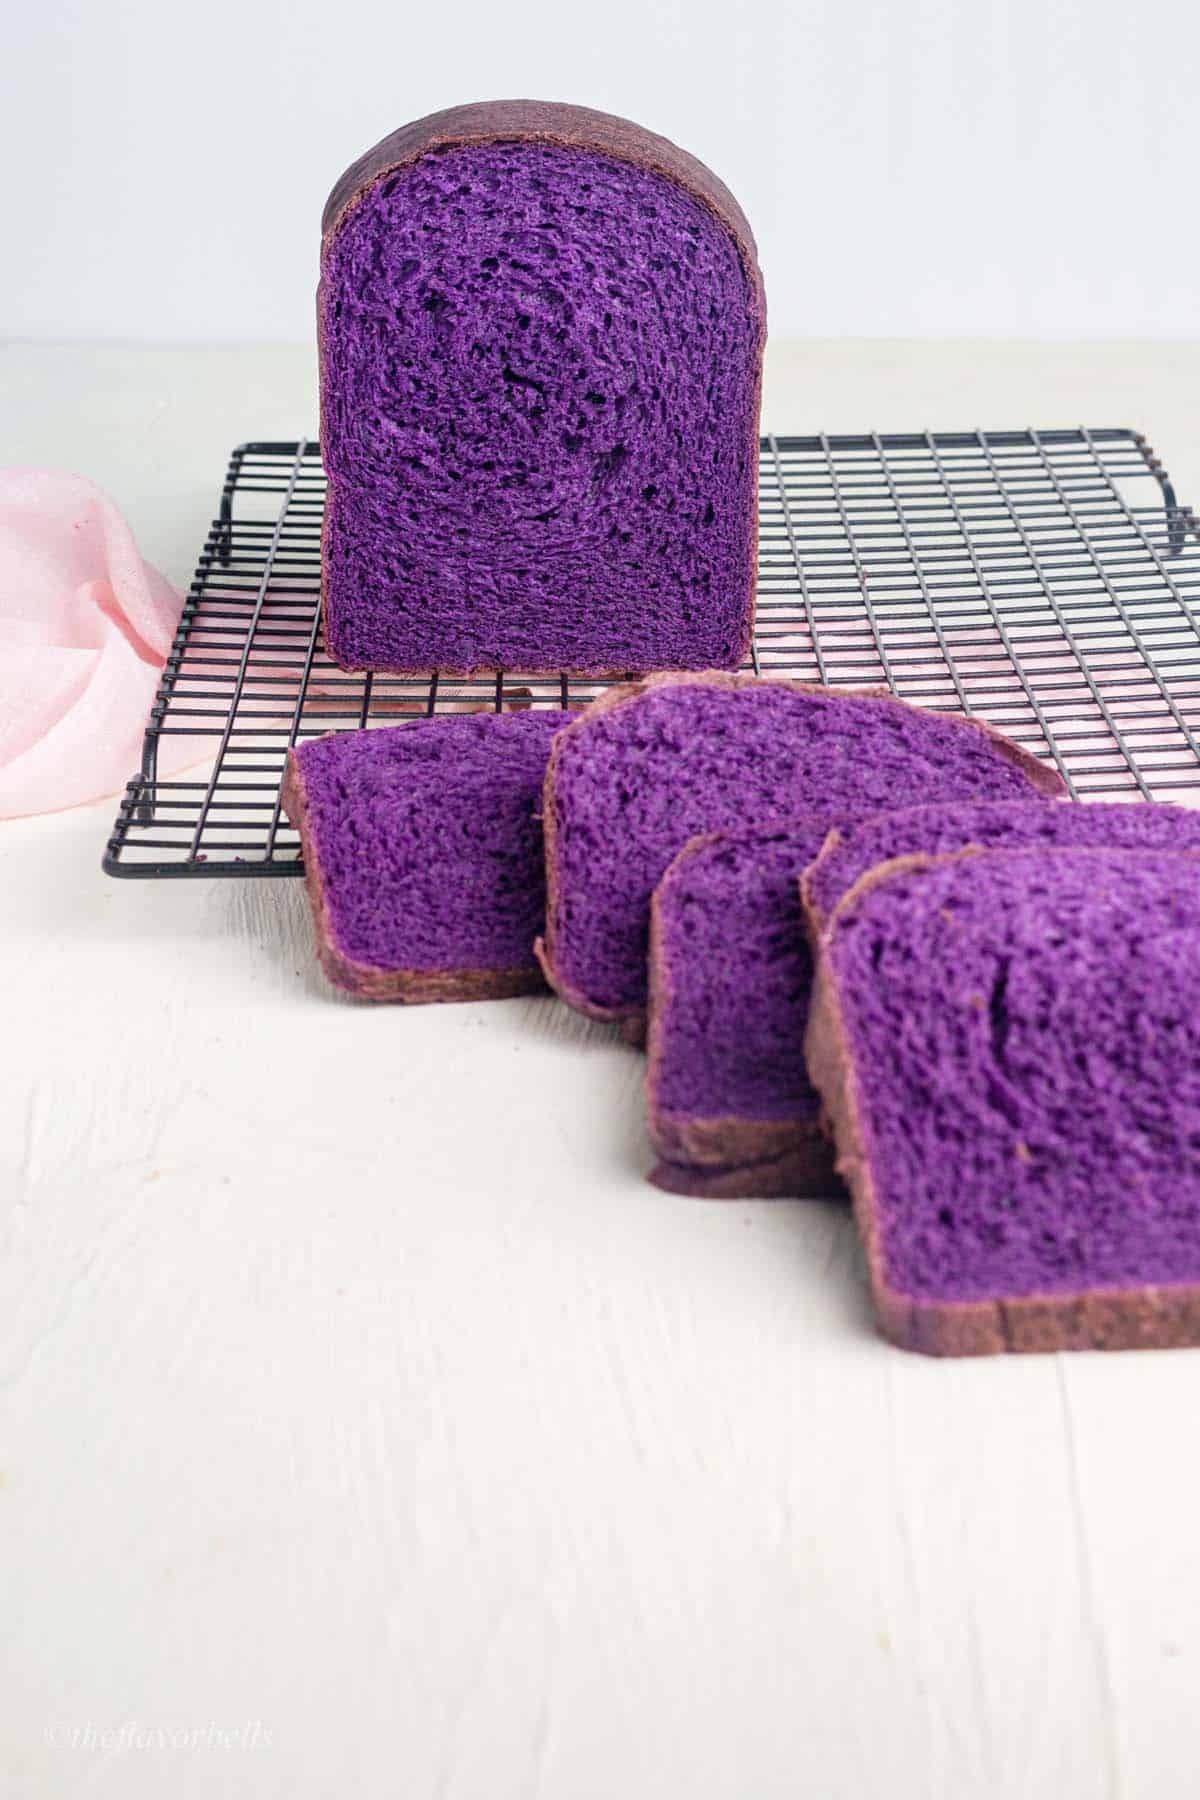 a loaf of ube bread with some slices